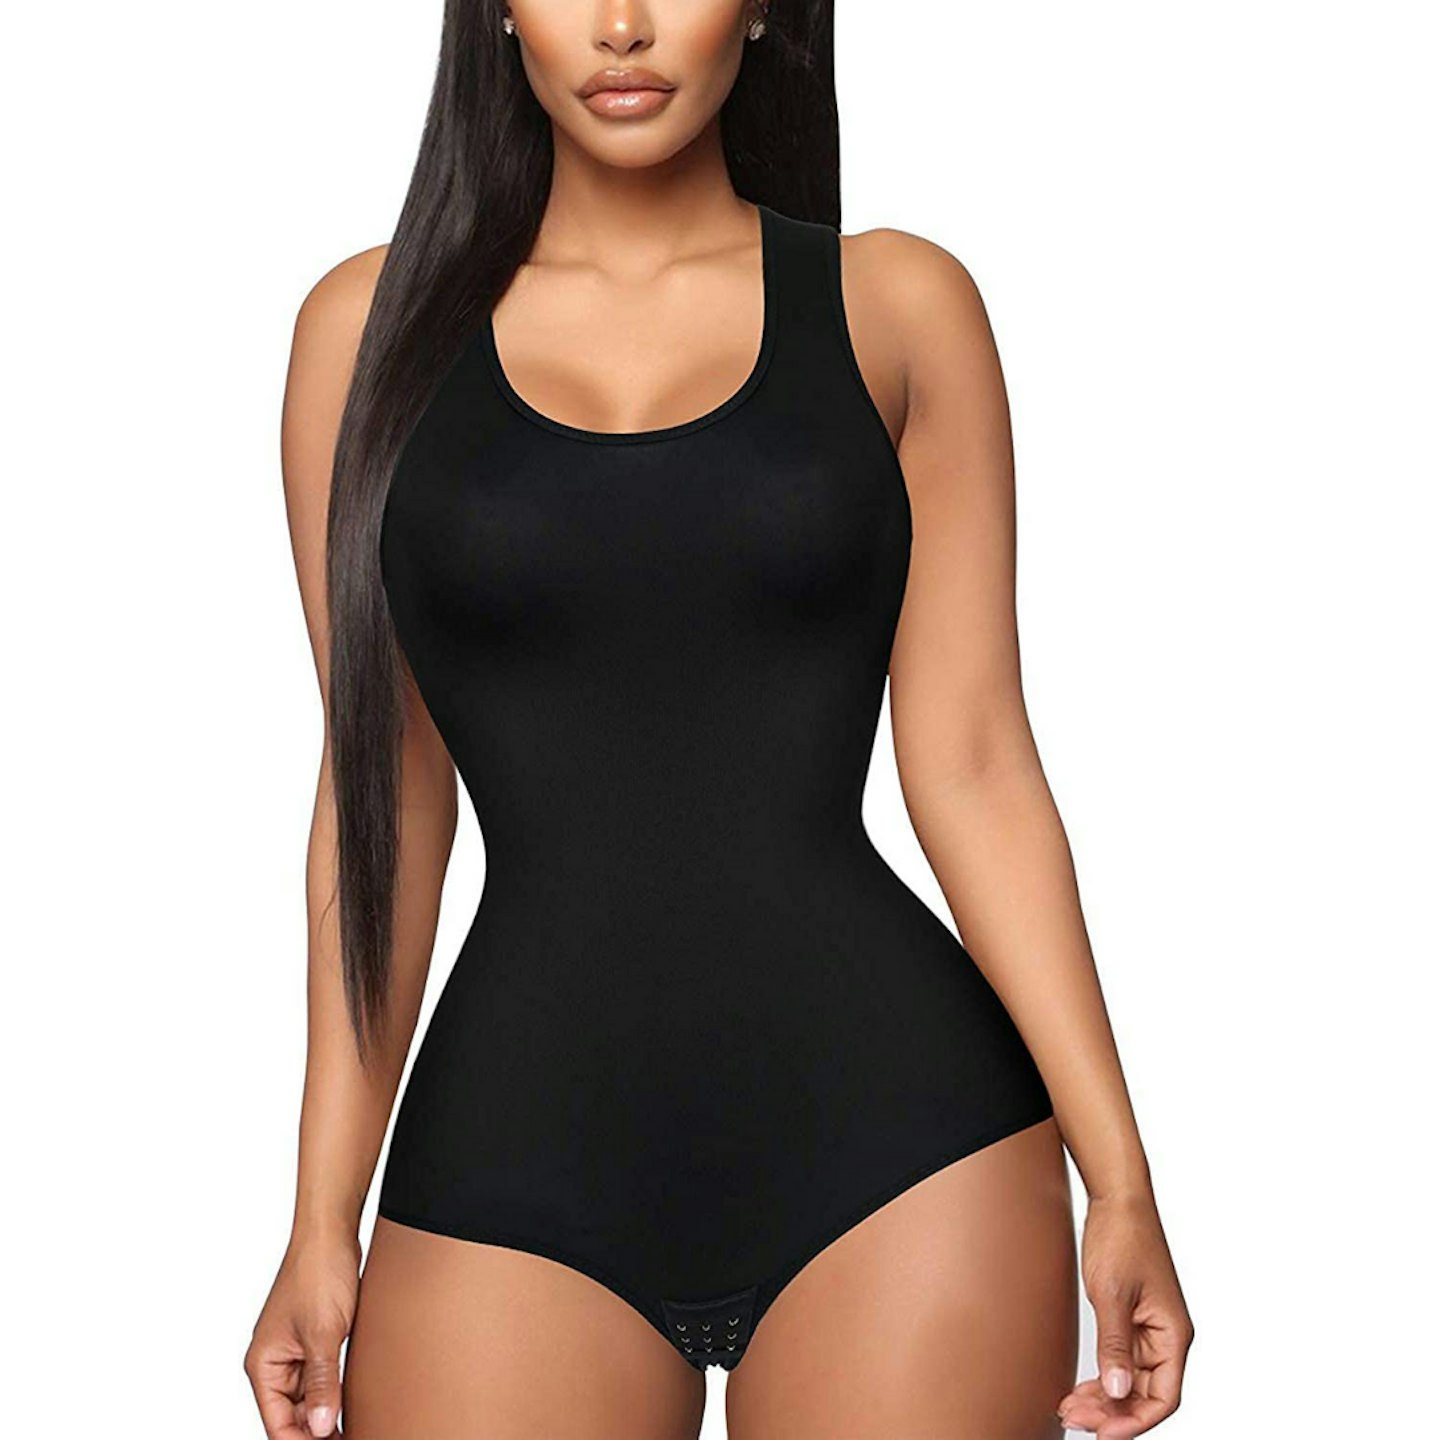 The best shapewear for every body type